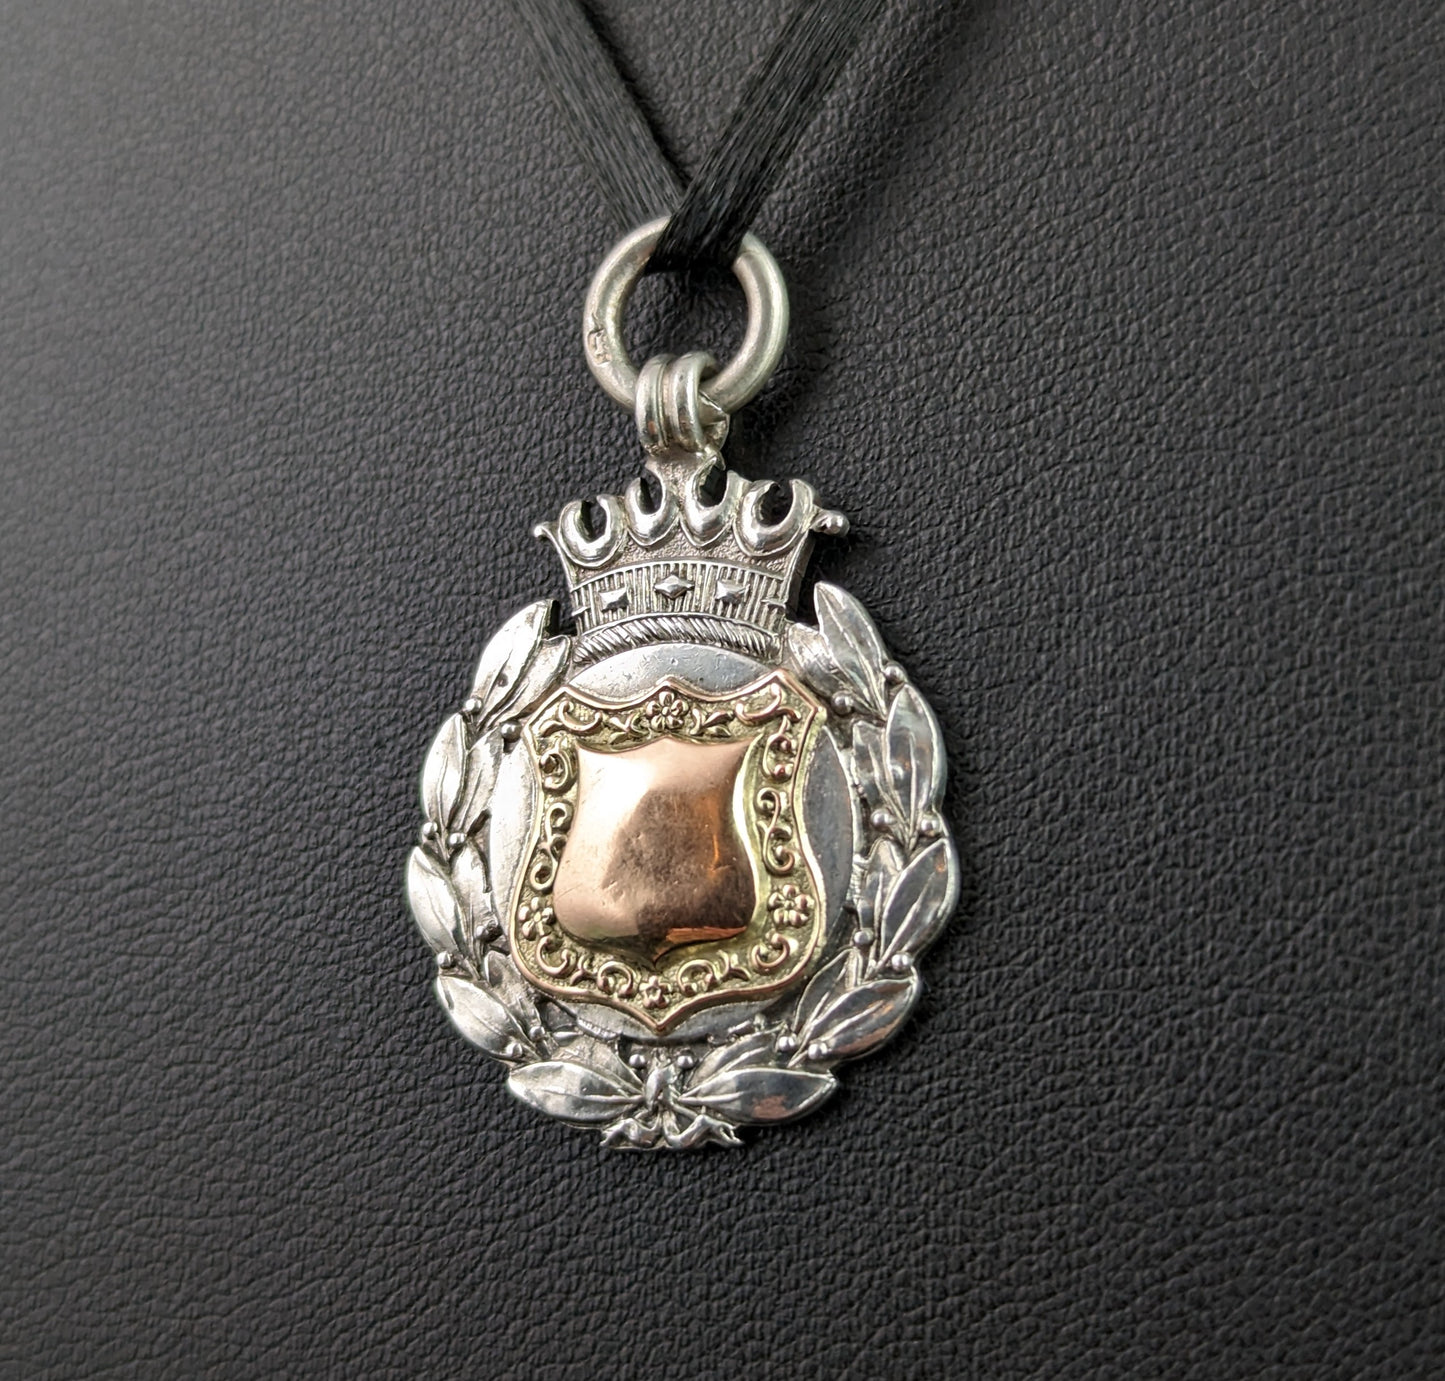 Vintage Silver and Rose gold fob pendant, Art Deco, Wreath and Crown